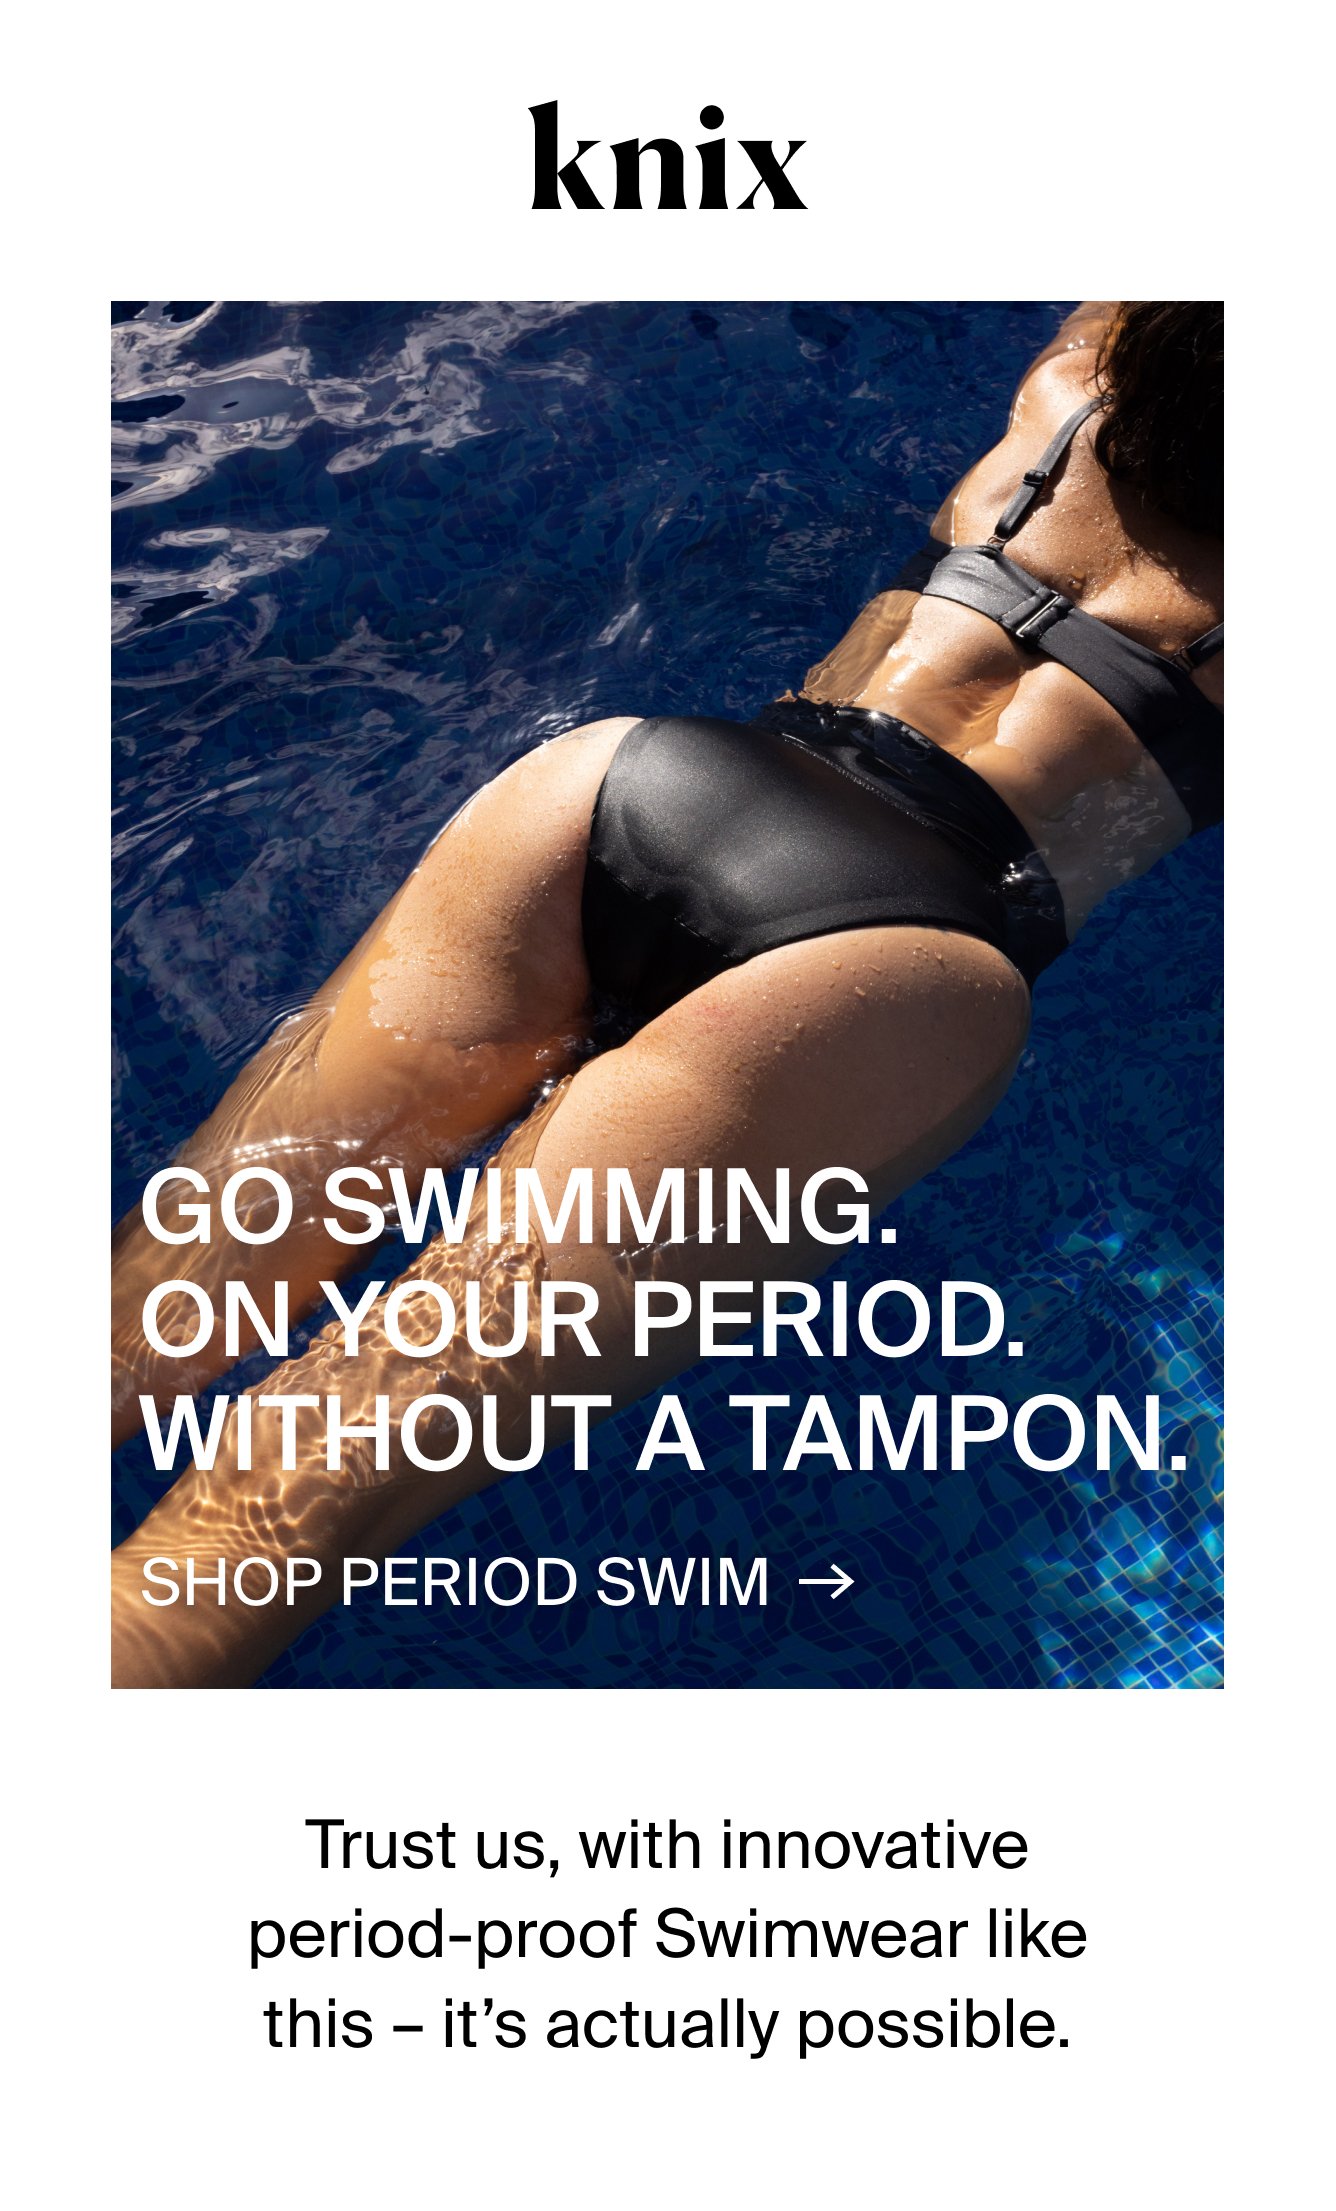 Can You Swim With Your Period?